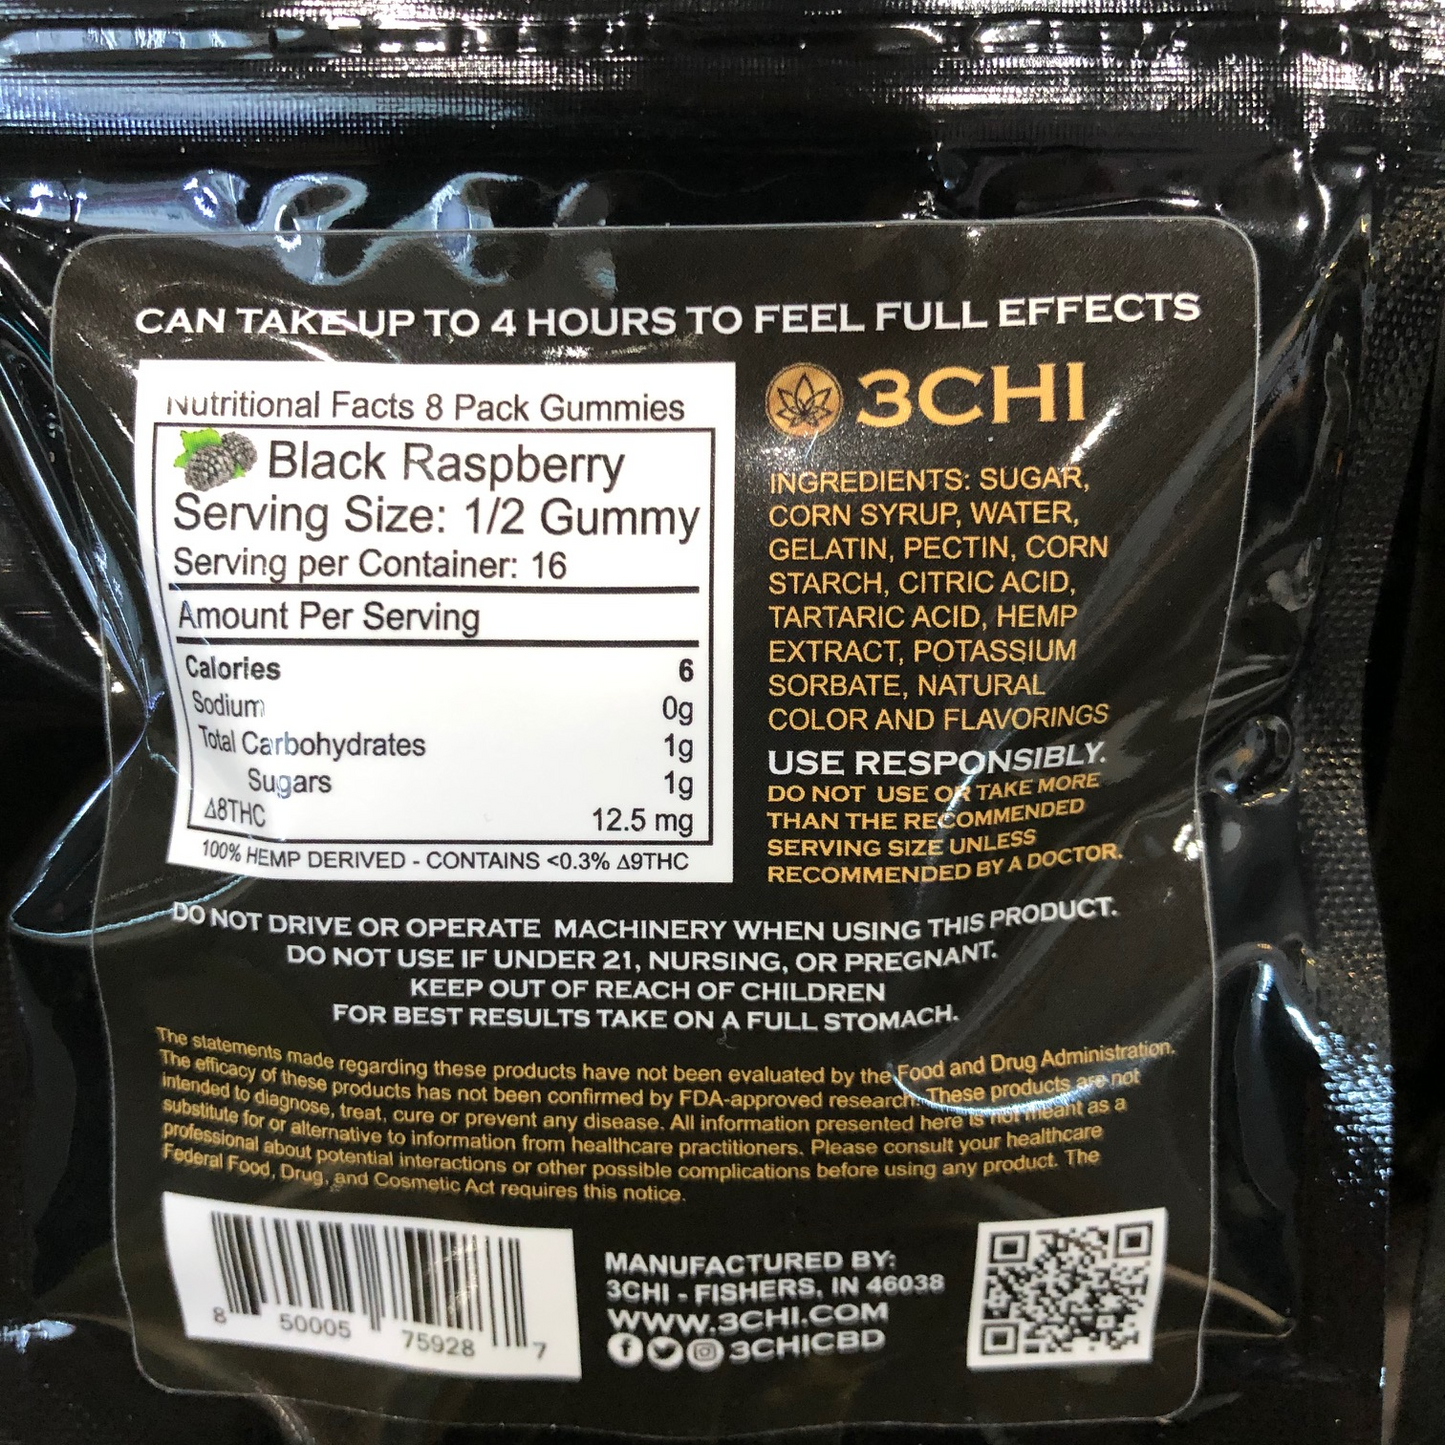 3chi thc delta 8 edibles 25mg 8ct Black Raspberry flavor nutritional facts